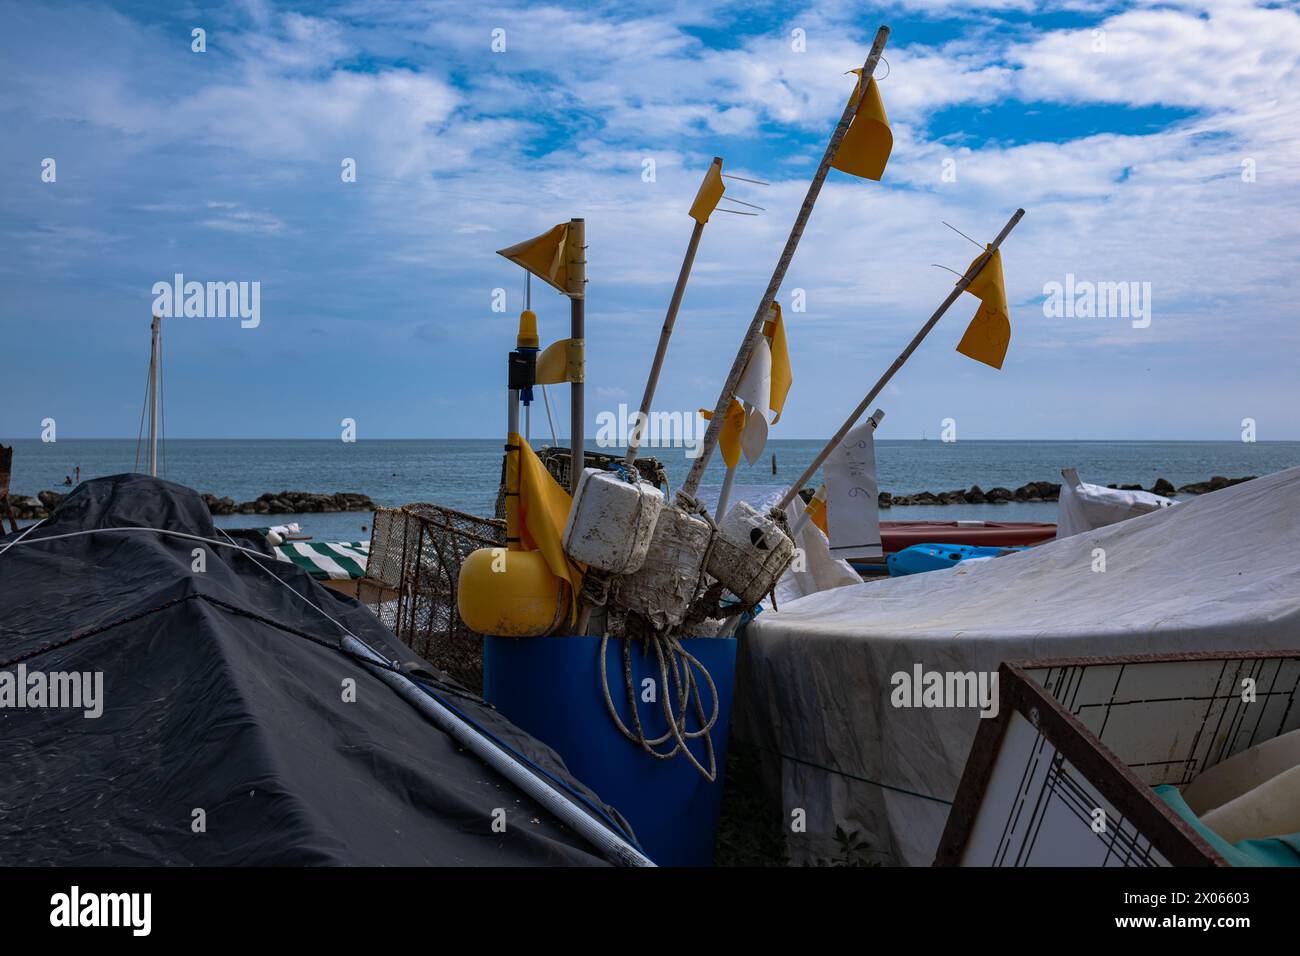 Fishing floats with yellow flags. Equipment for sea fishing on the seashore on a sunny day. Stock Photo